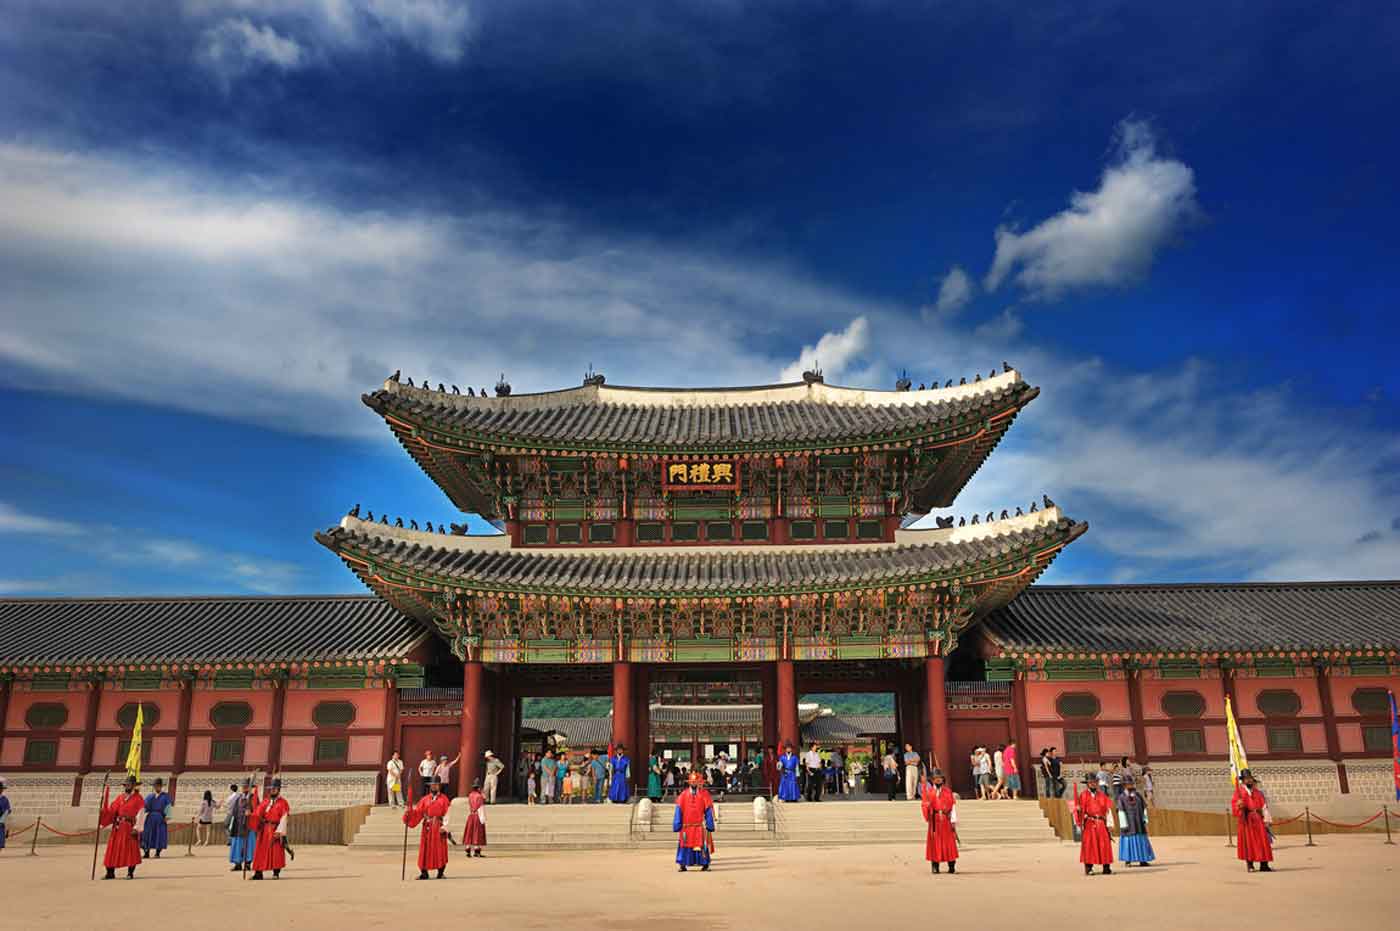 gyeongbokgung-palace-must-see-attractions-in-seoul